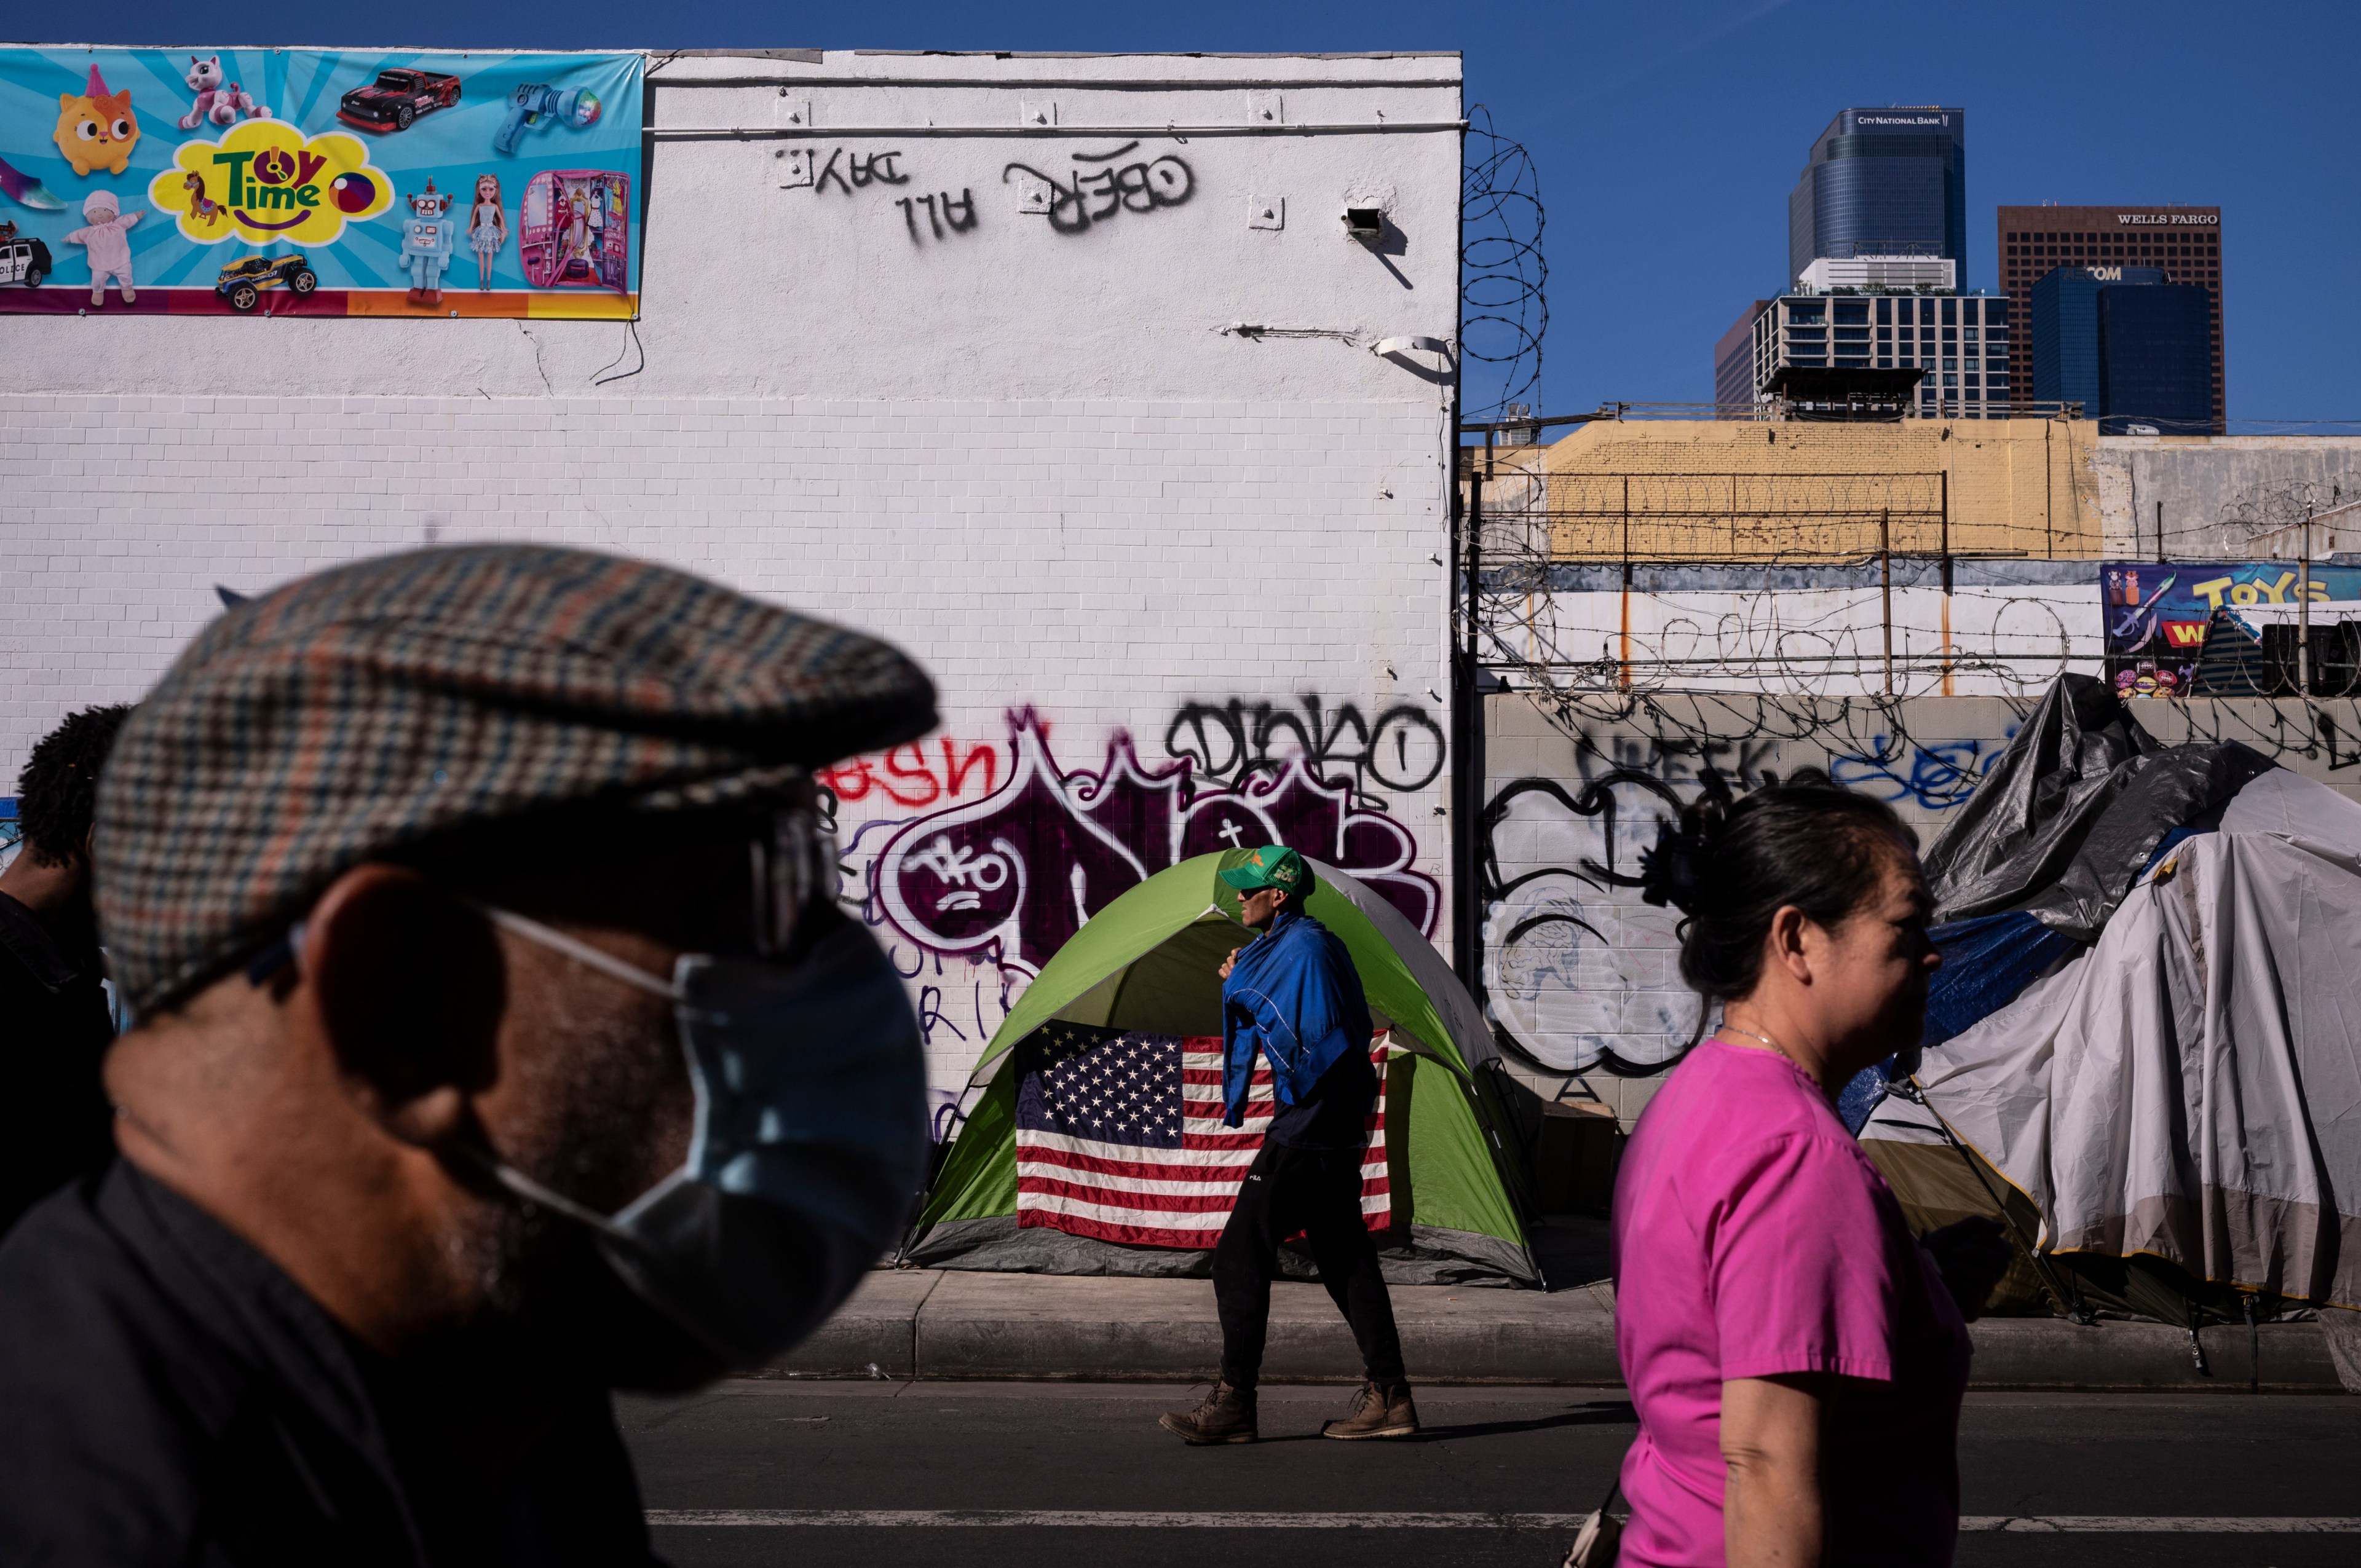 People walk by green tent with American flag set up in front of graffitied wall